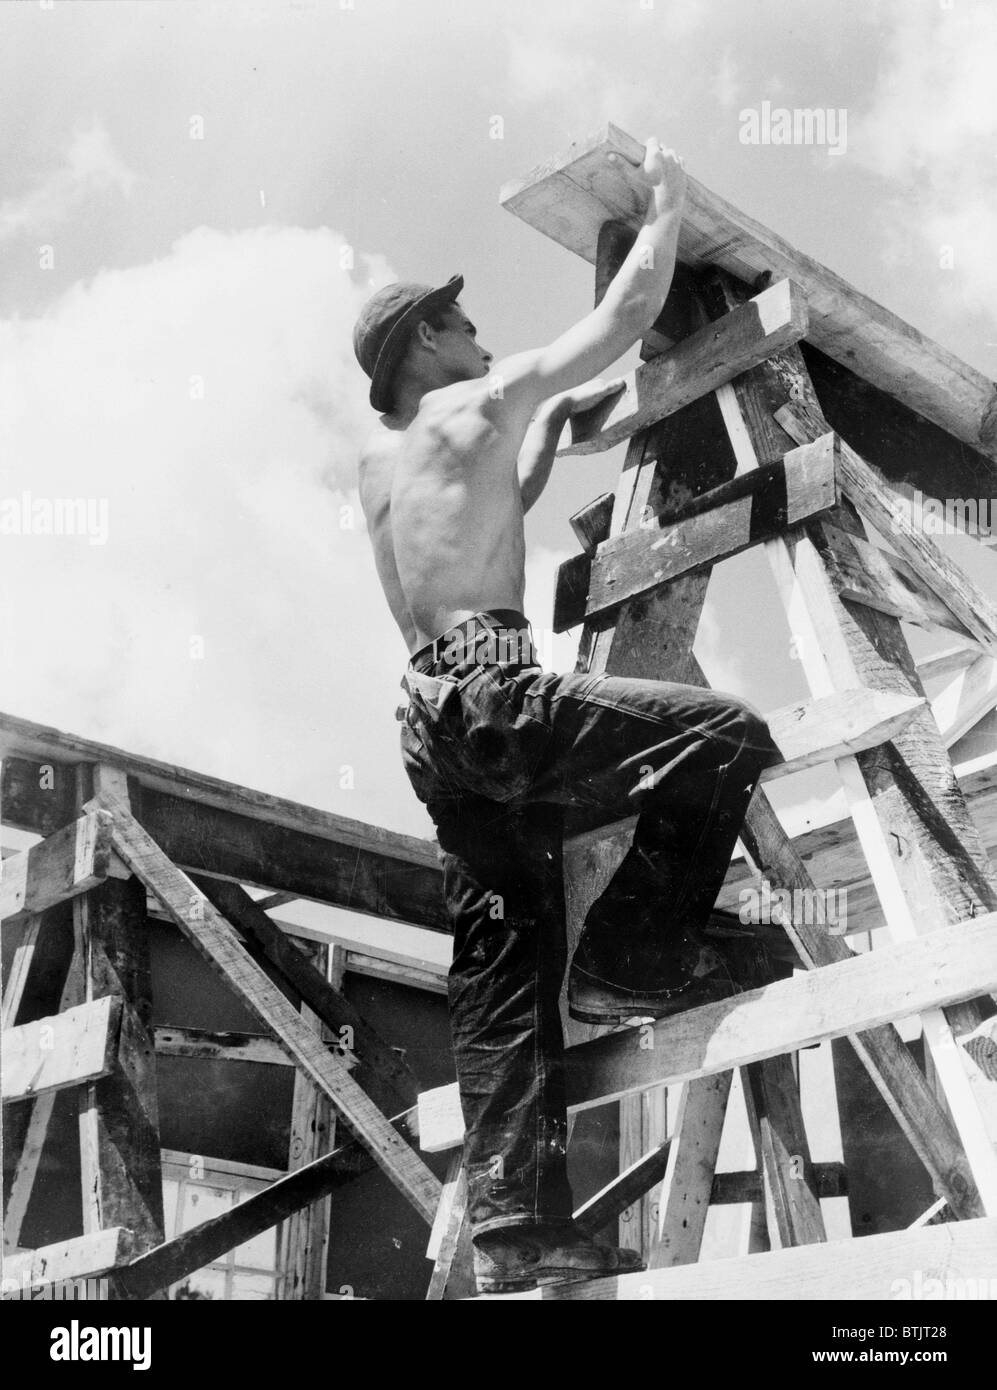 Civilian Conservation Corps at work. Enrollee William L. Cross climbing up on a scaffold erected for assembling a prefabricated Stock Photo